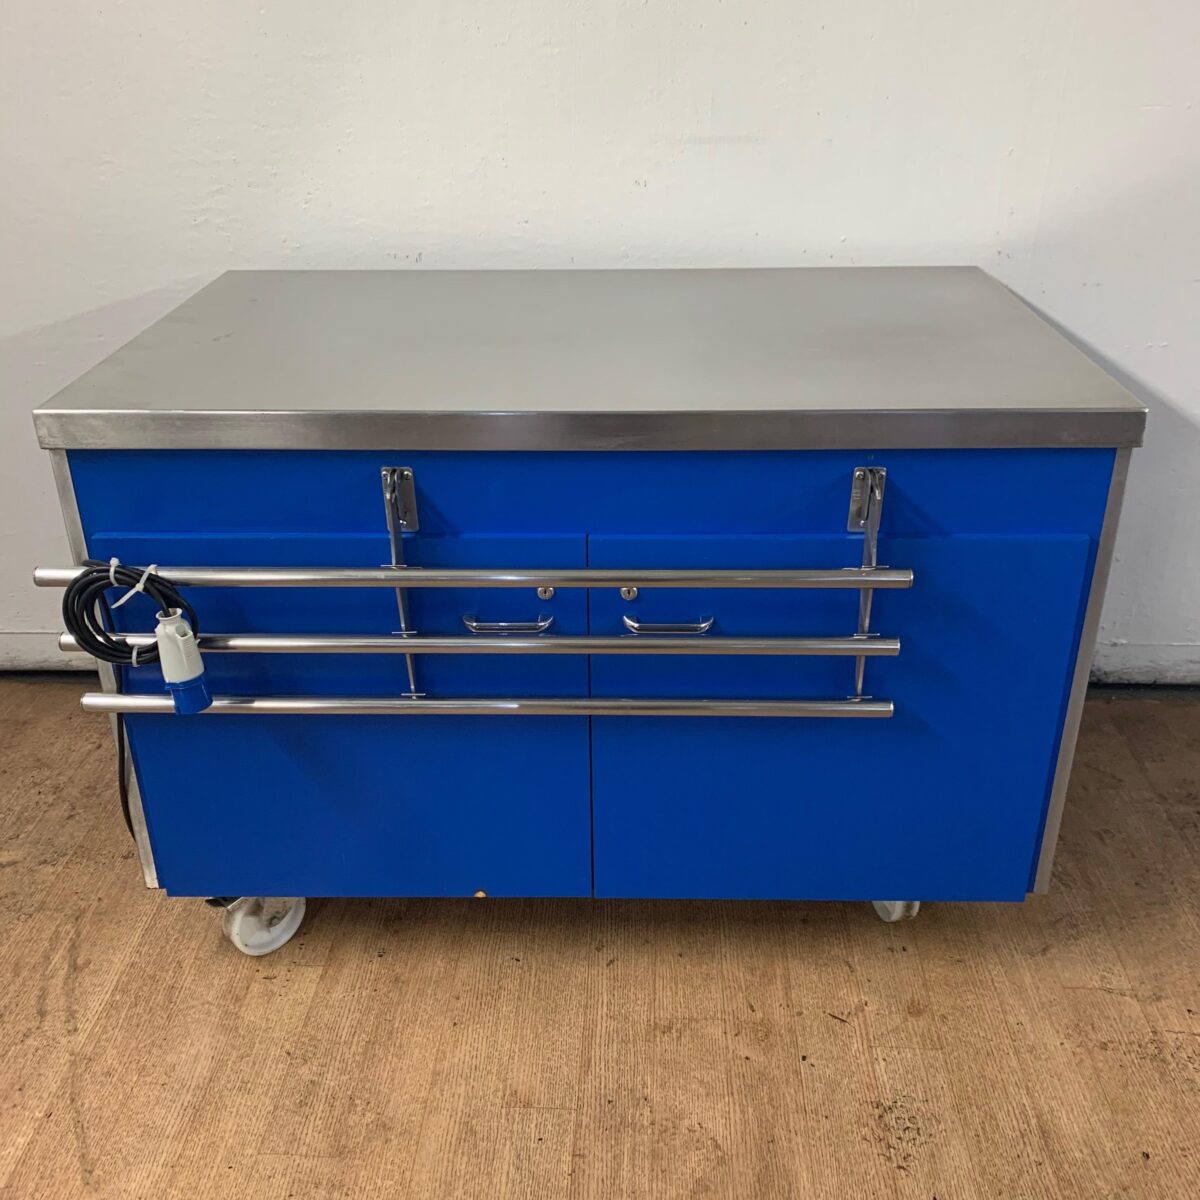 Used   Stainless steel top cabinet with tray slide and power sockets 131cmW x 79cmD x 89cmH